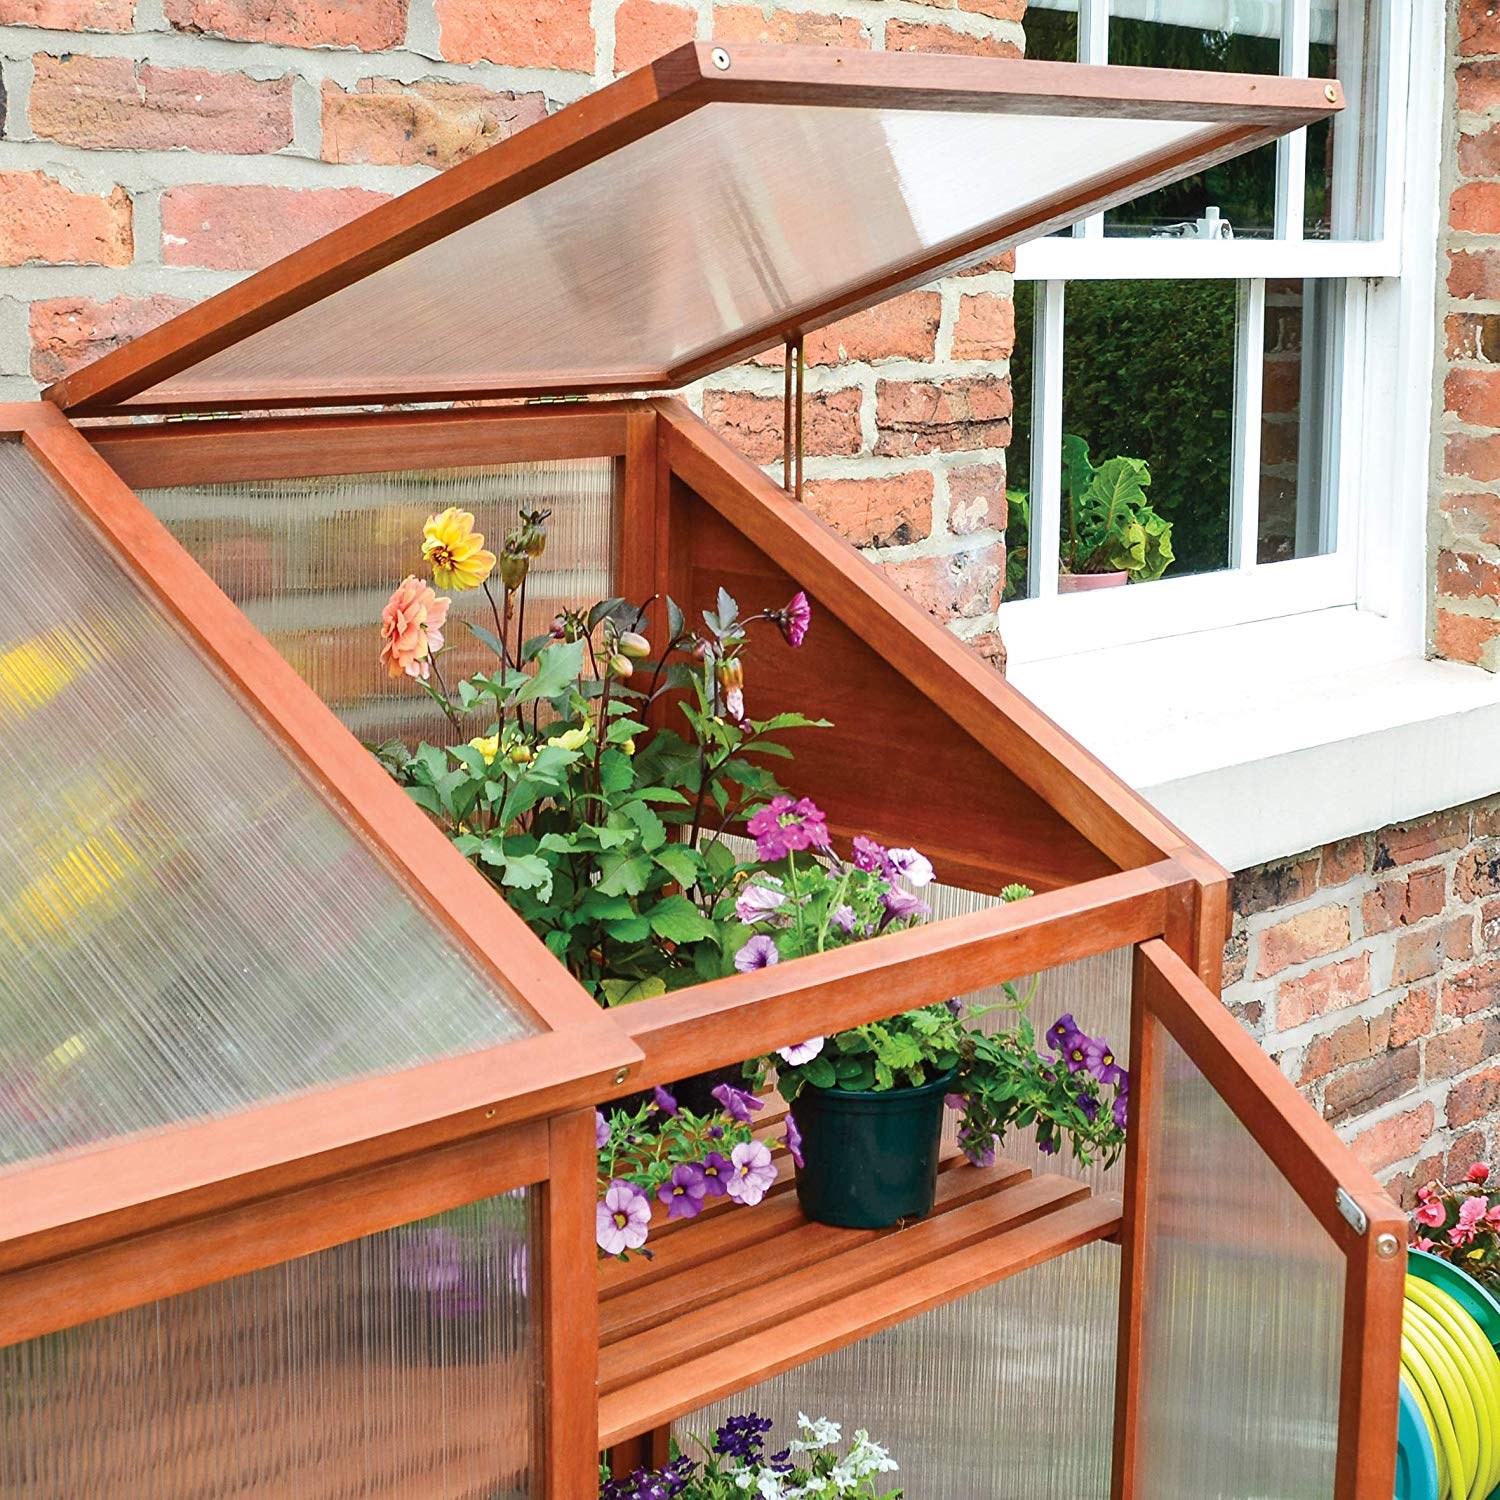 H1.44m (4ft 9in) Hardwood Mini Greenhouse Cold Frame by Rowlinson®